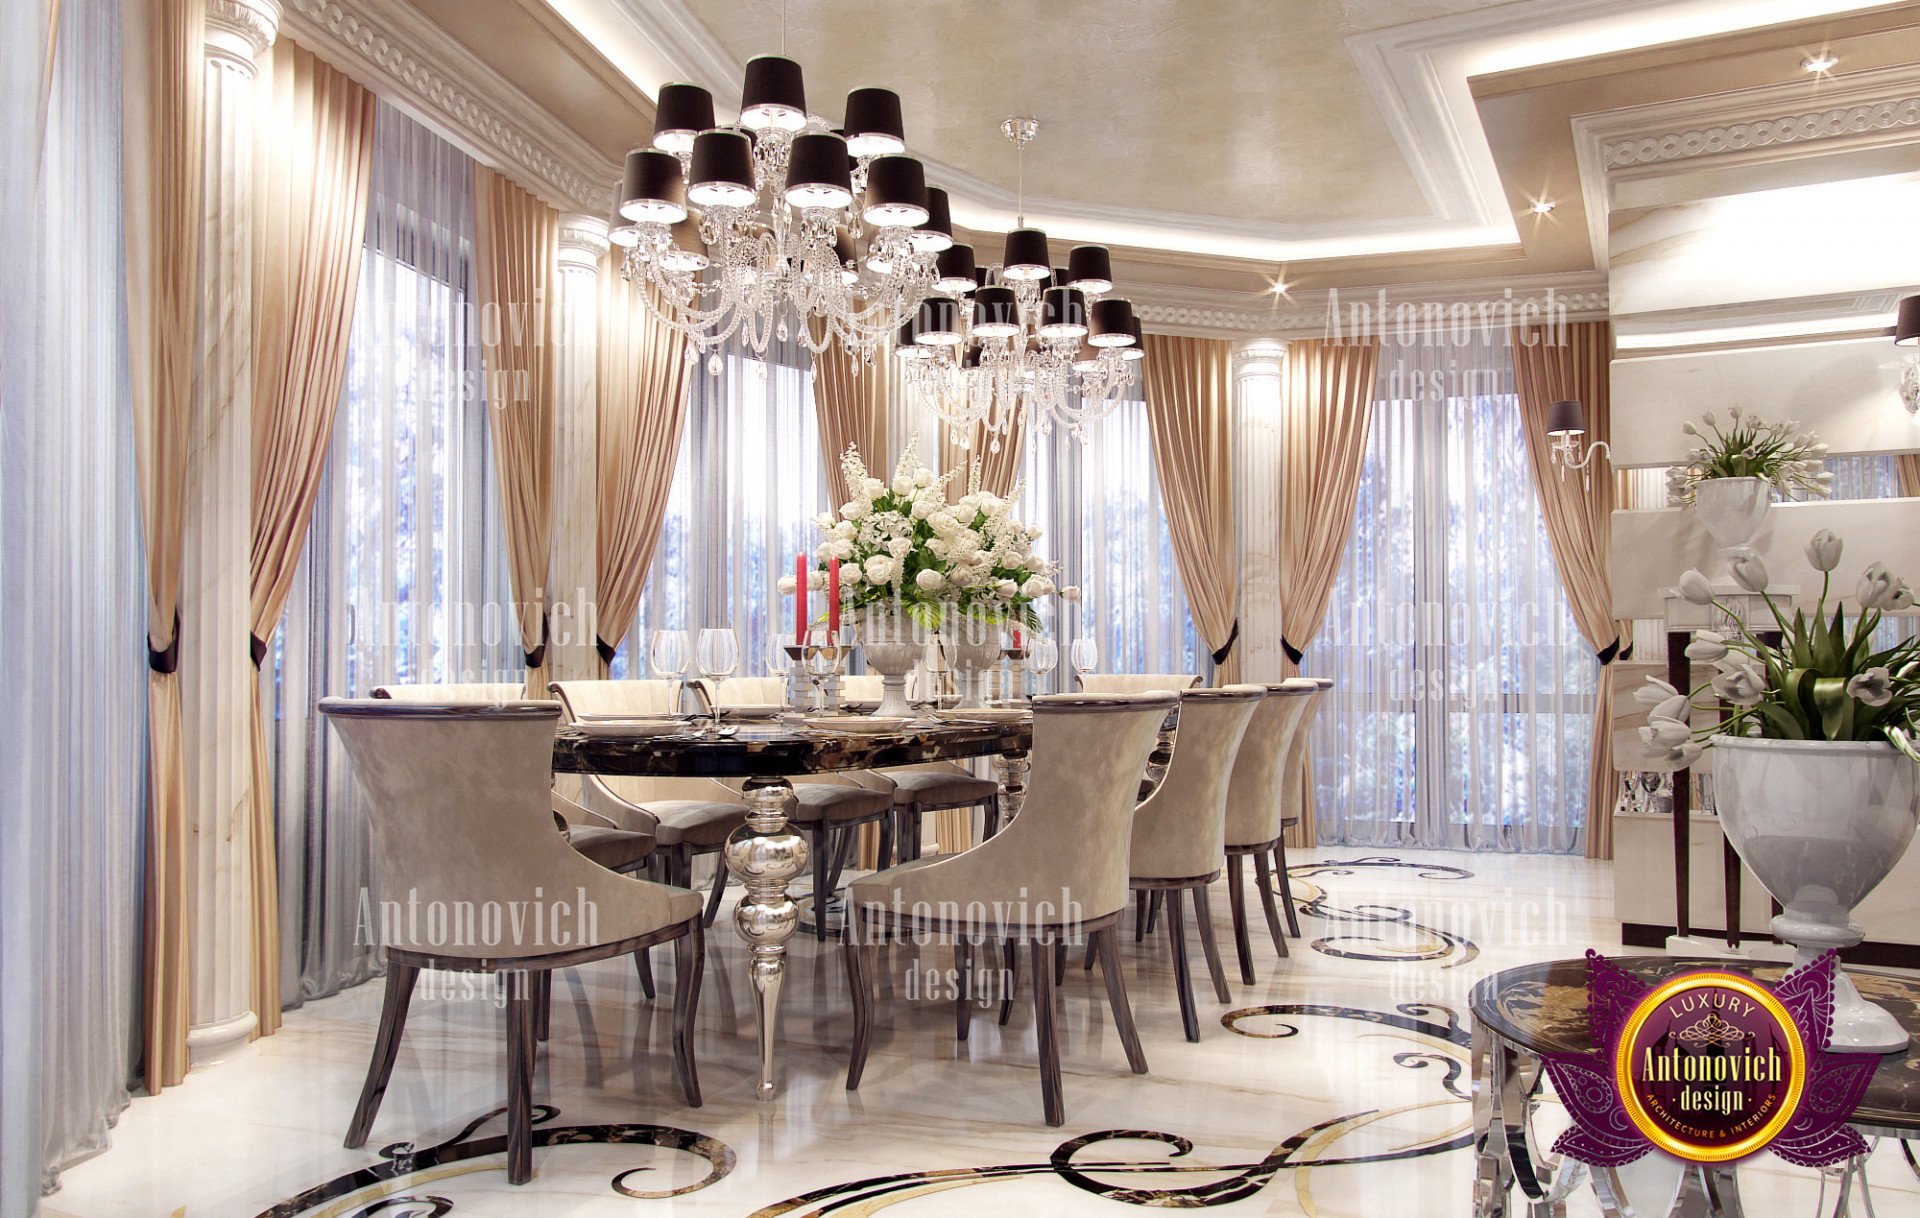 The Dining Room - Family Unity: How to Decorate your Dining Room Table on a ... : Gurney wants to create a feeling of a dining room existing in a void. whatever events happened before or happen after a particular scene do not matter.